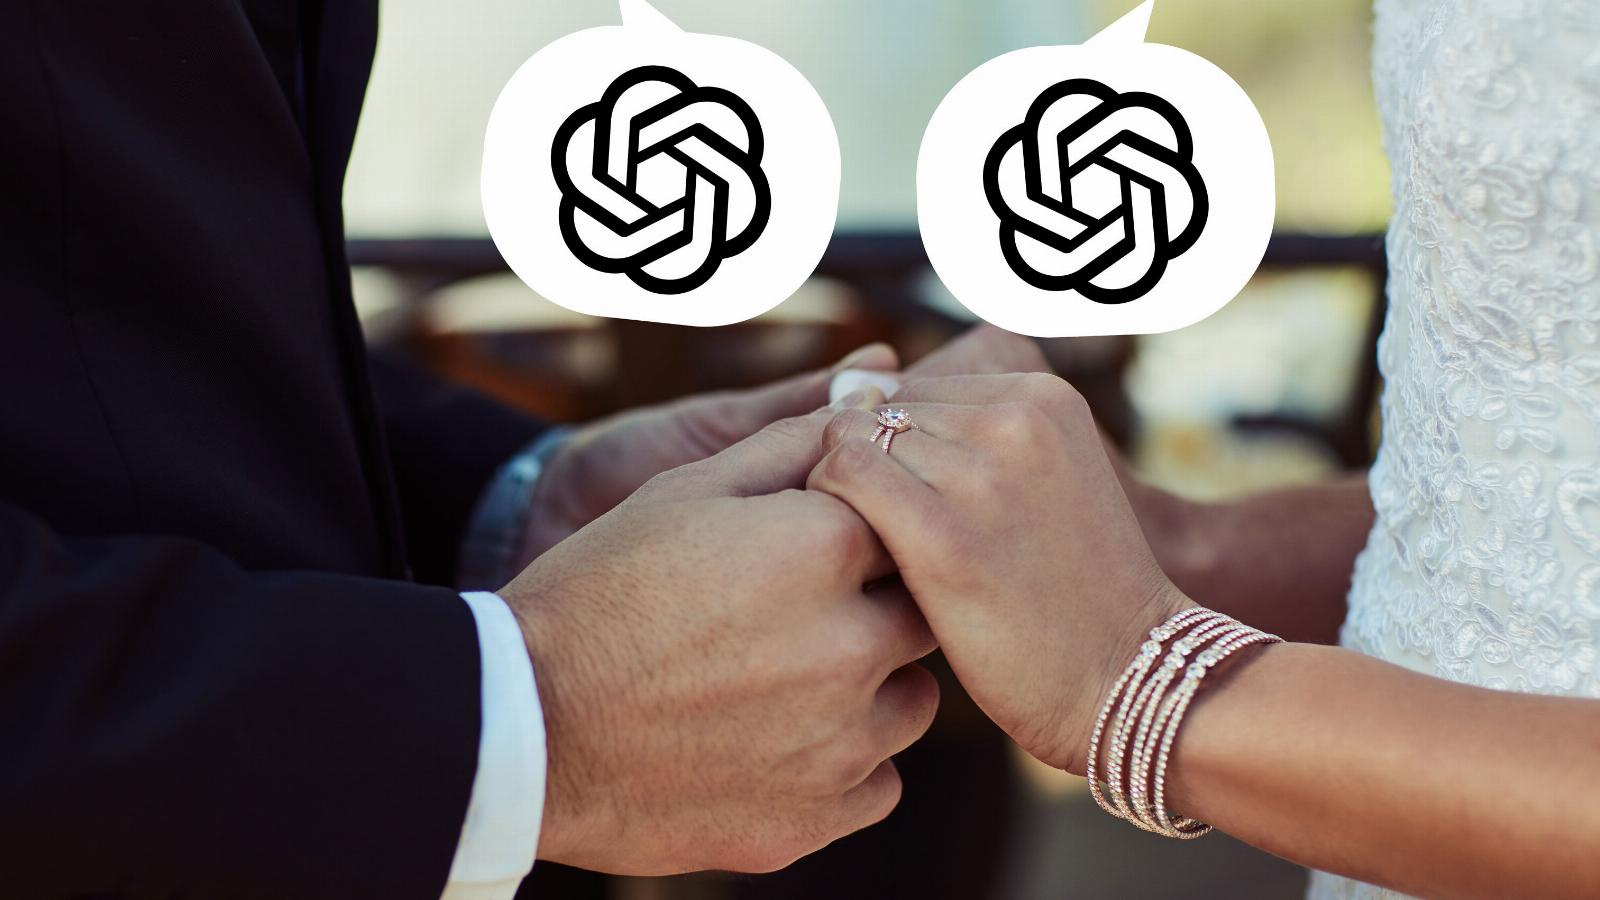 Wedding platform Joy will let you outsource your vows to OpenAI